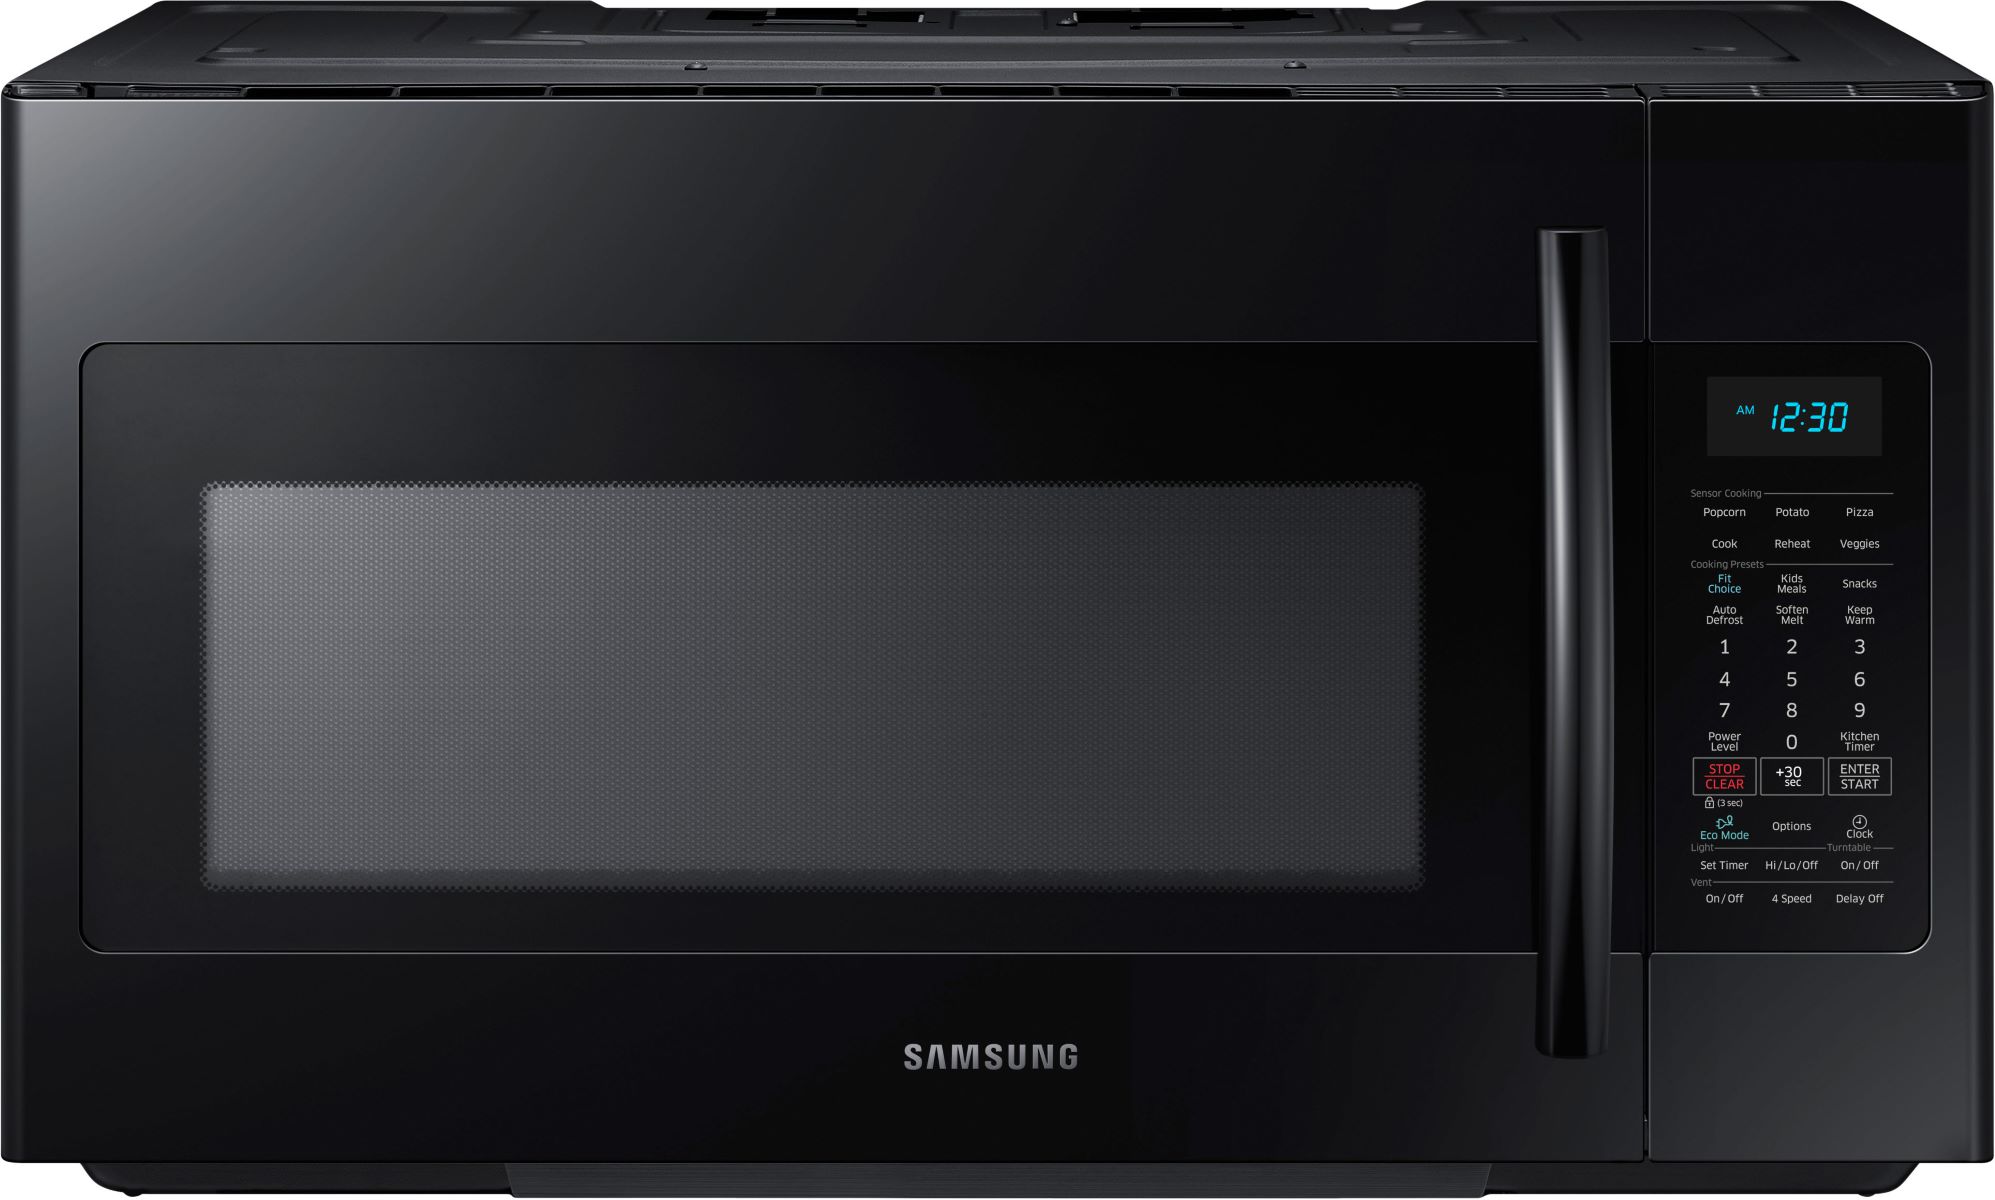 How To Fix The Error Code E-31 For Samsung Microwave